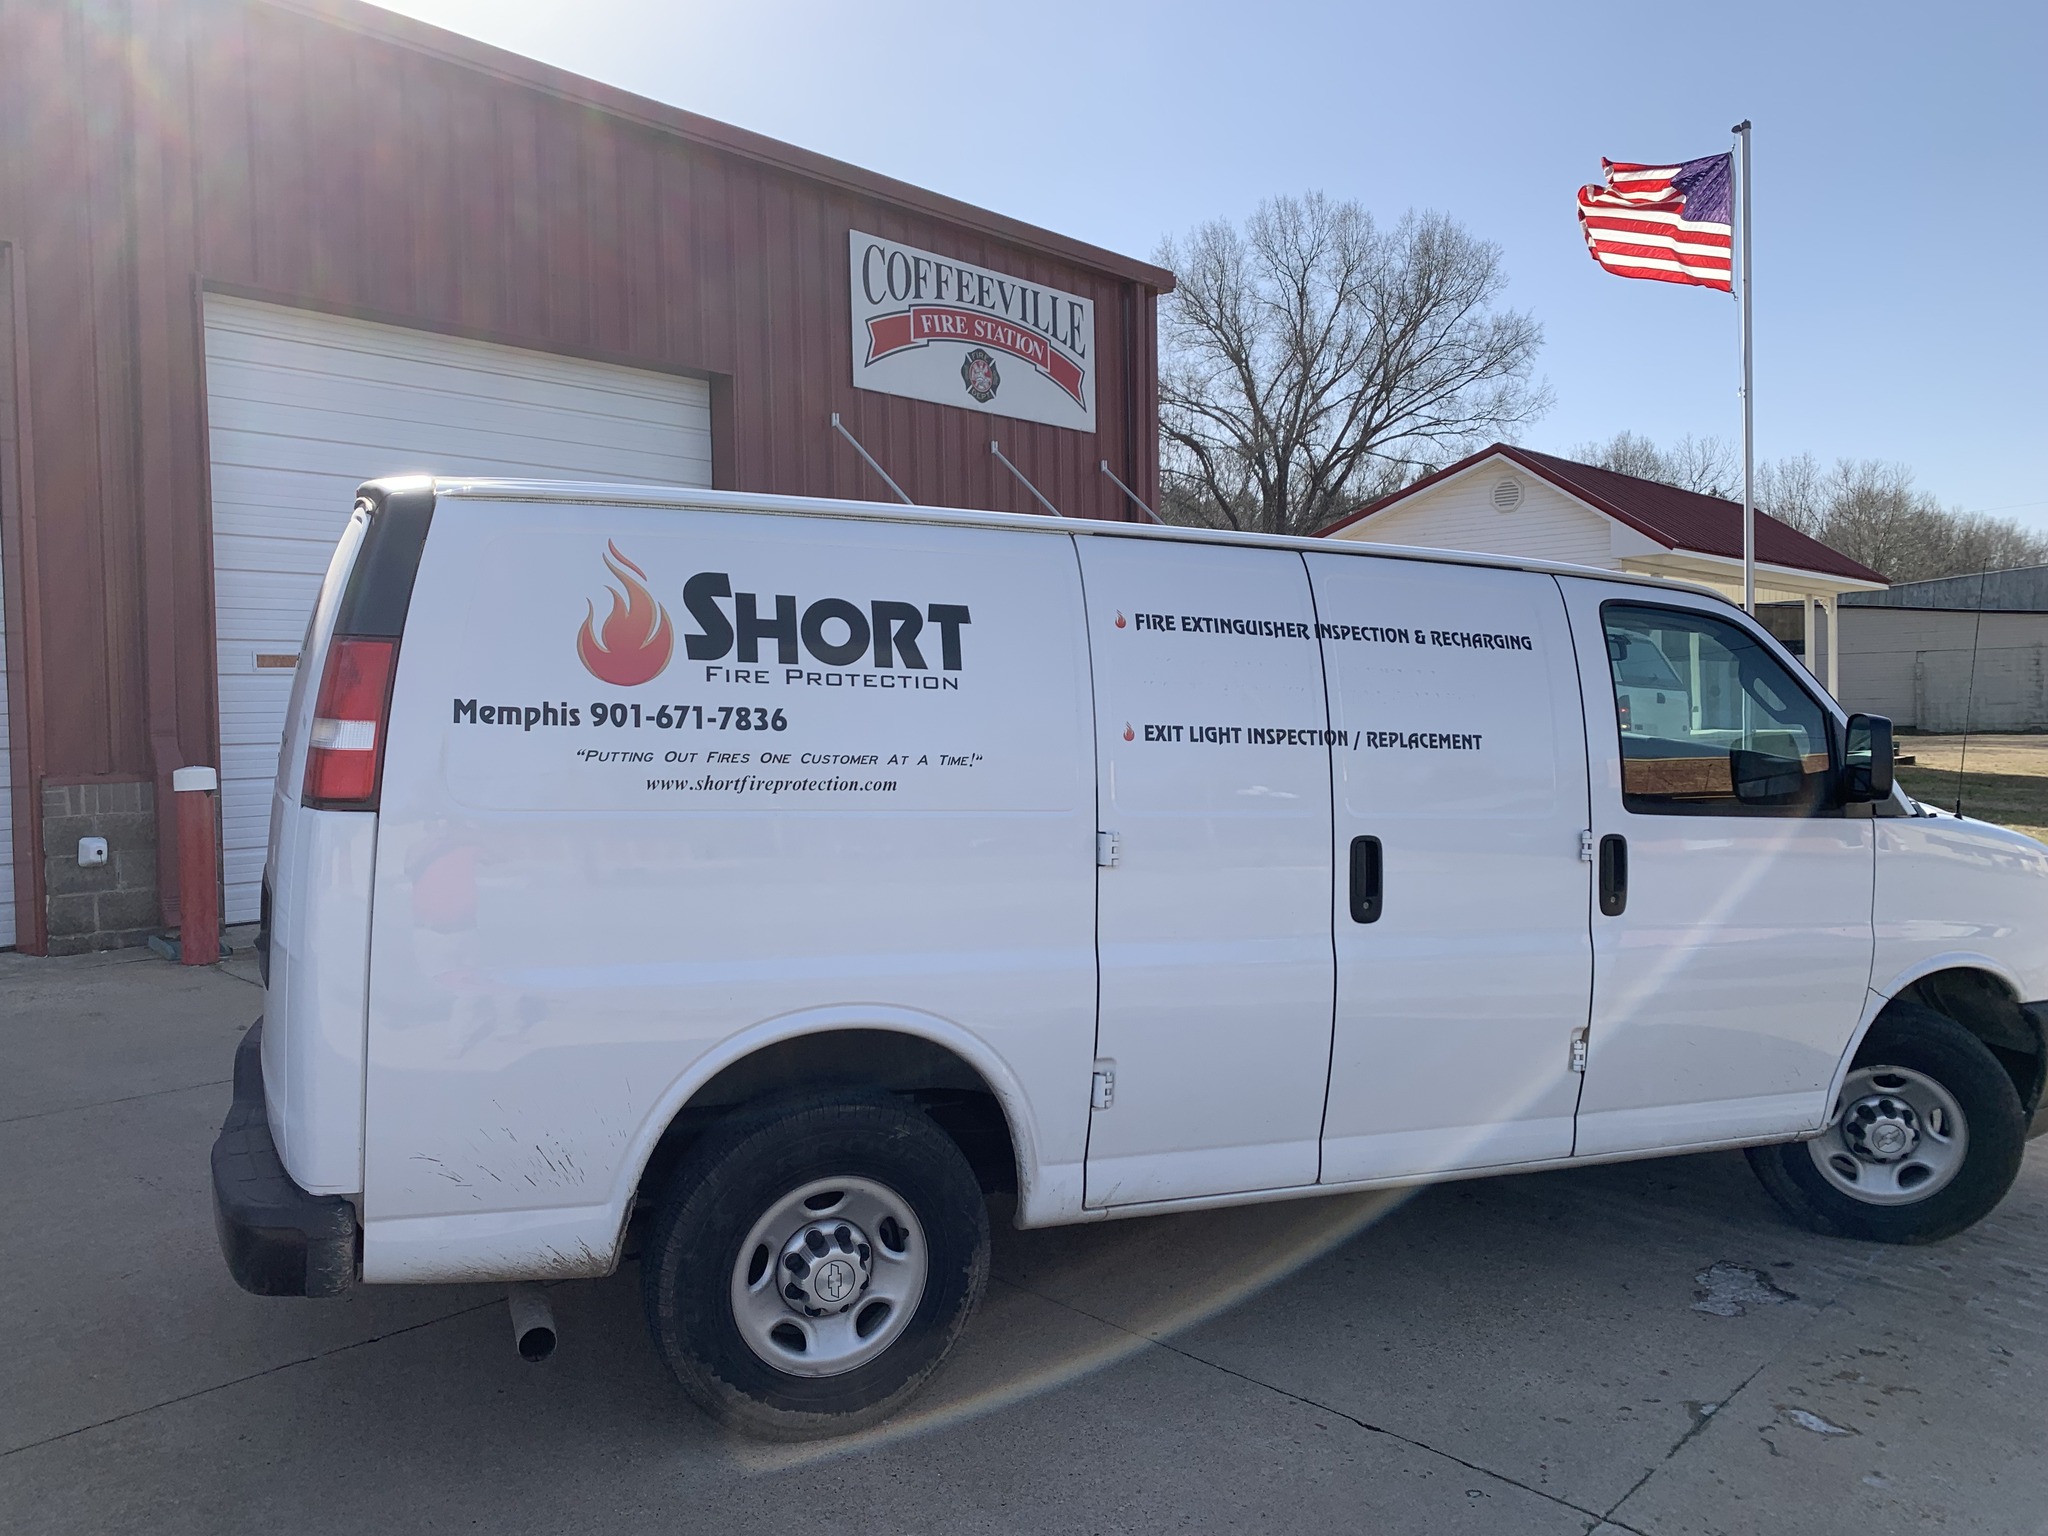 Short Fire Protection Van in Front of Coffeeville MS Fire Department